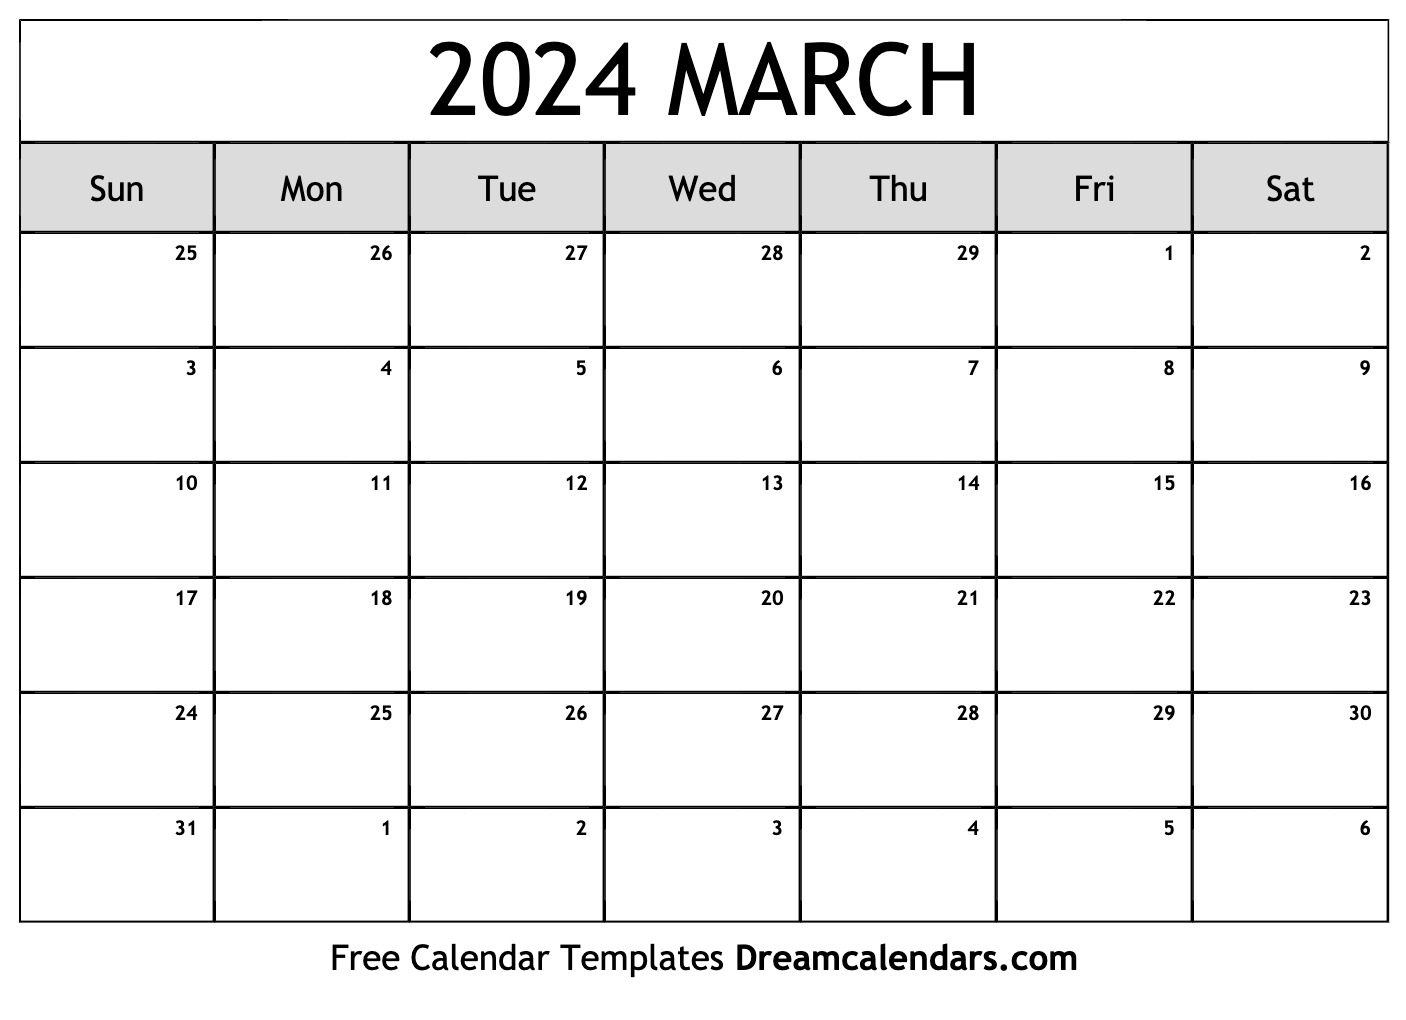 March 2024 Calendar | Free Blank Printable With Holidays for Blank Printable March 2024 Calendar